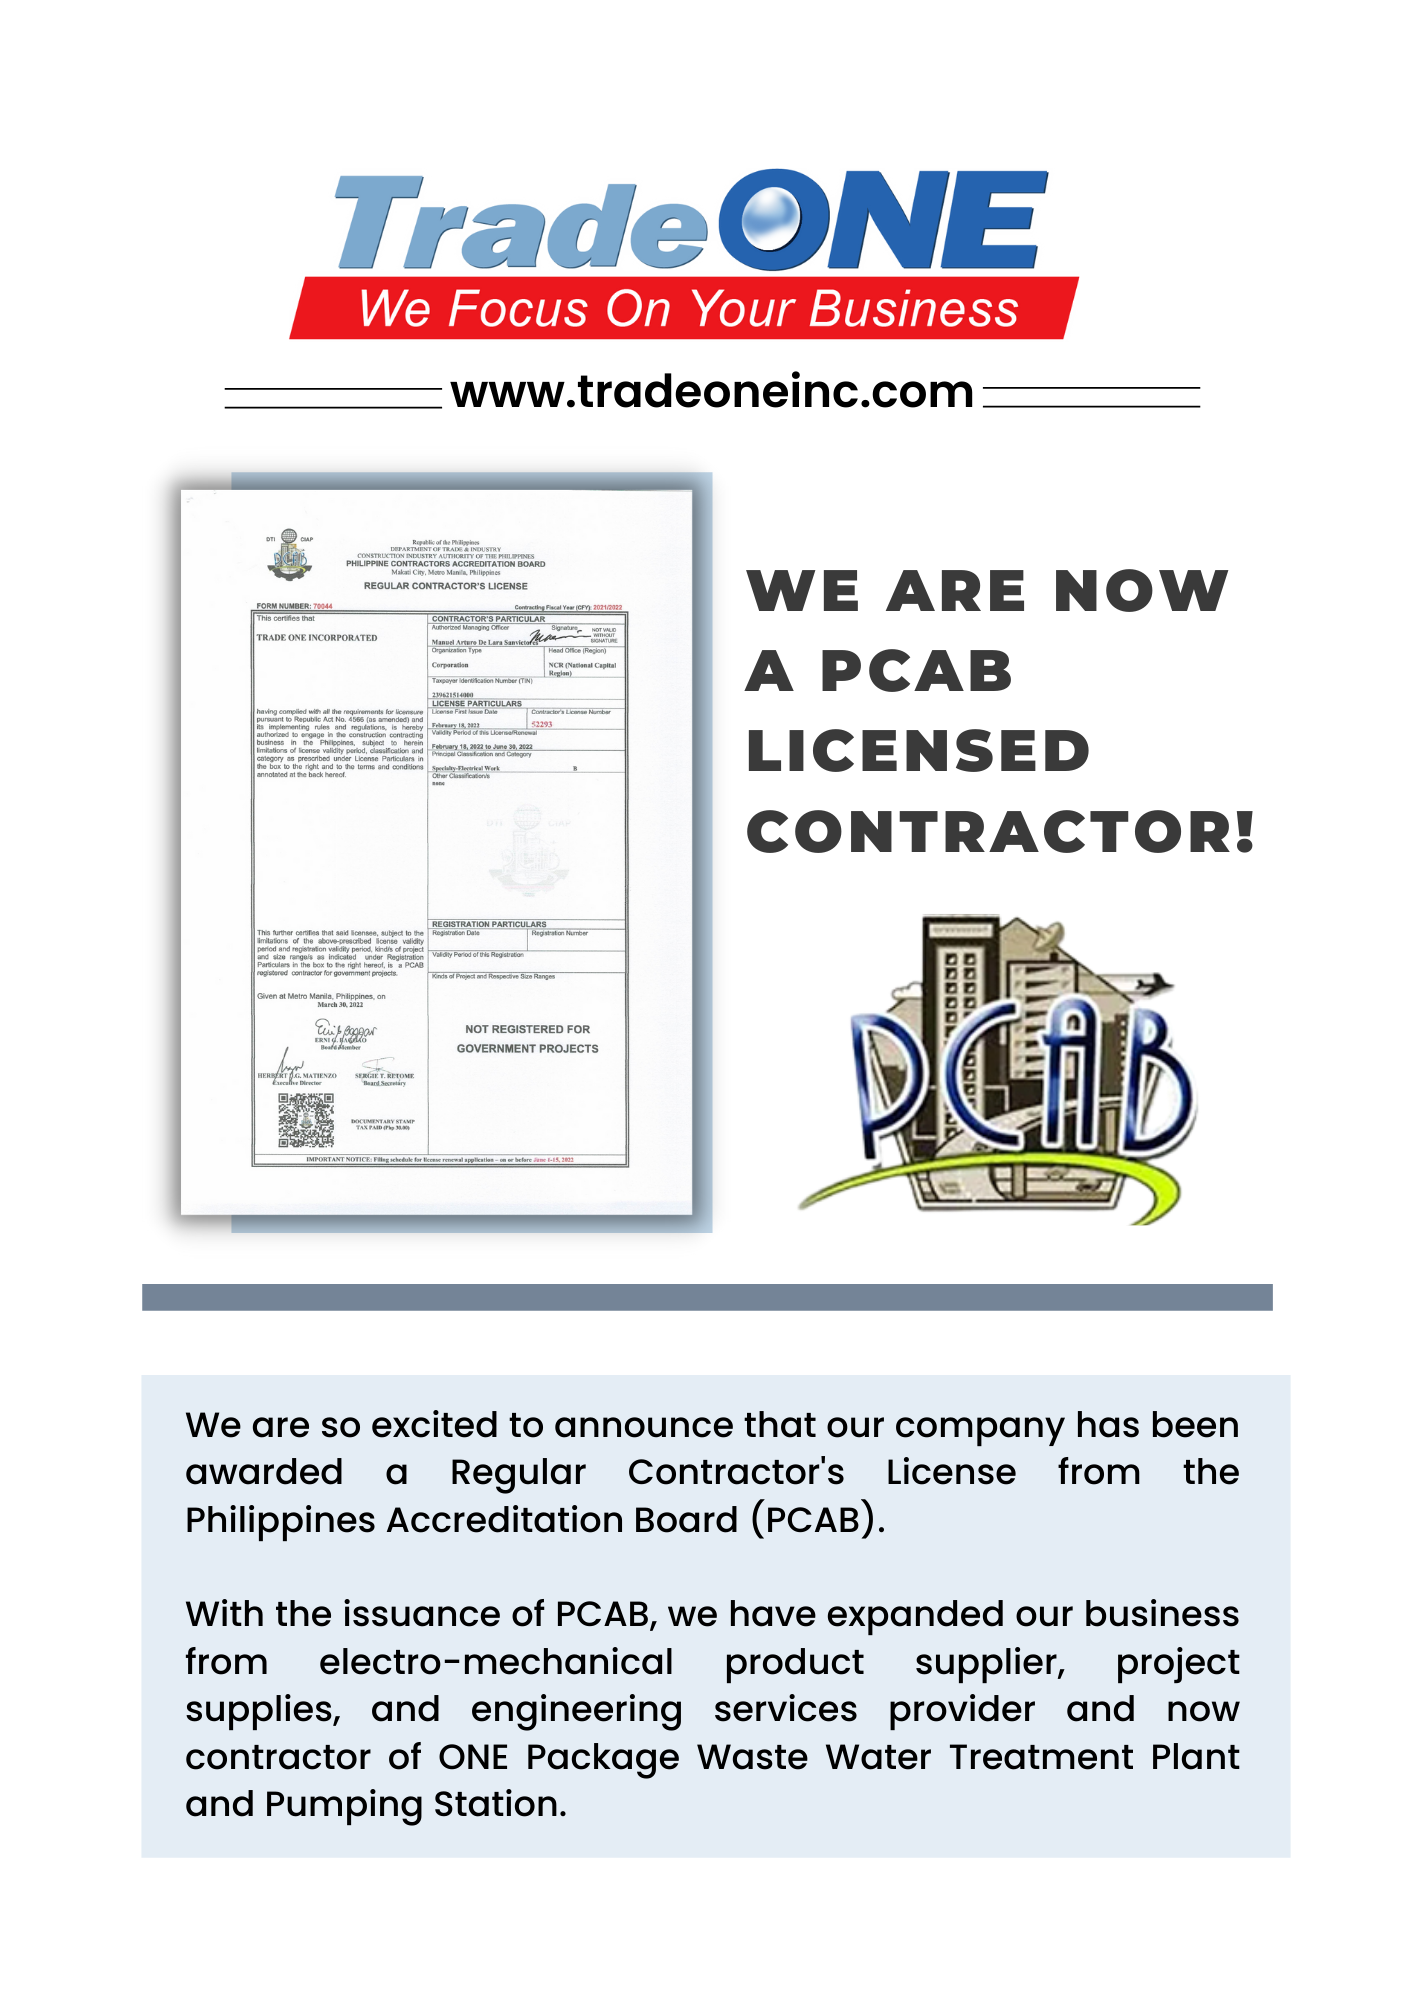 PCAB ACCREDITED APPROVED - Trade One Inc